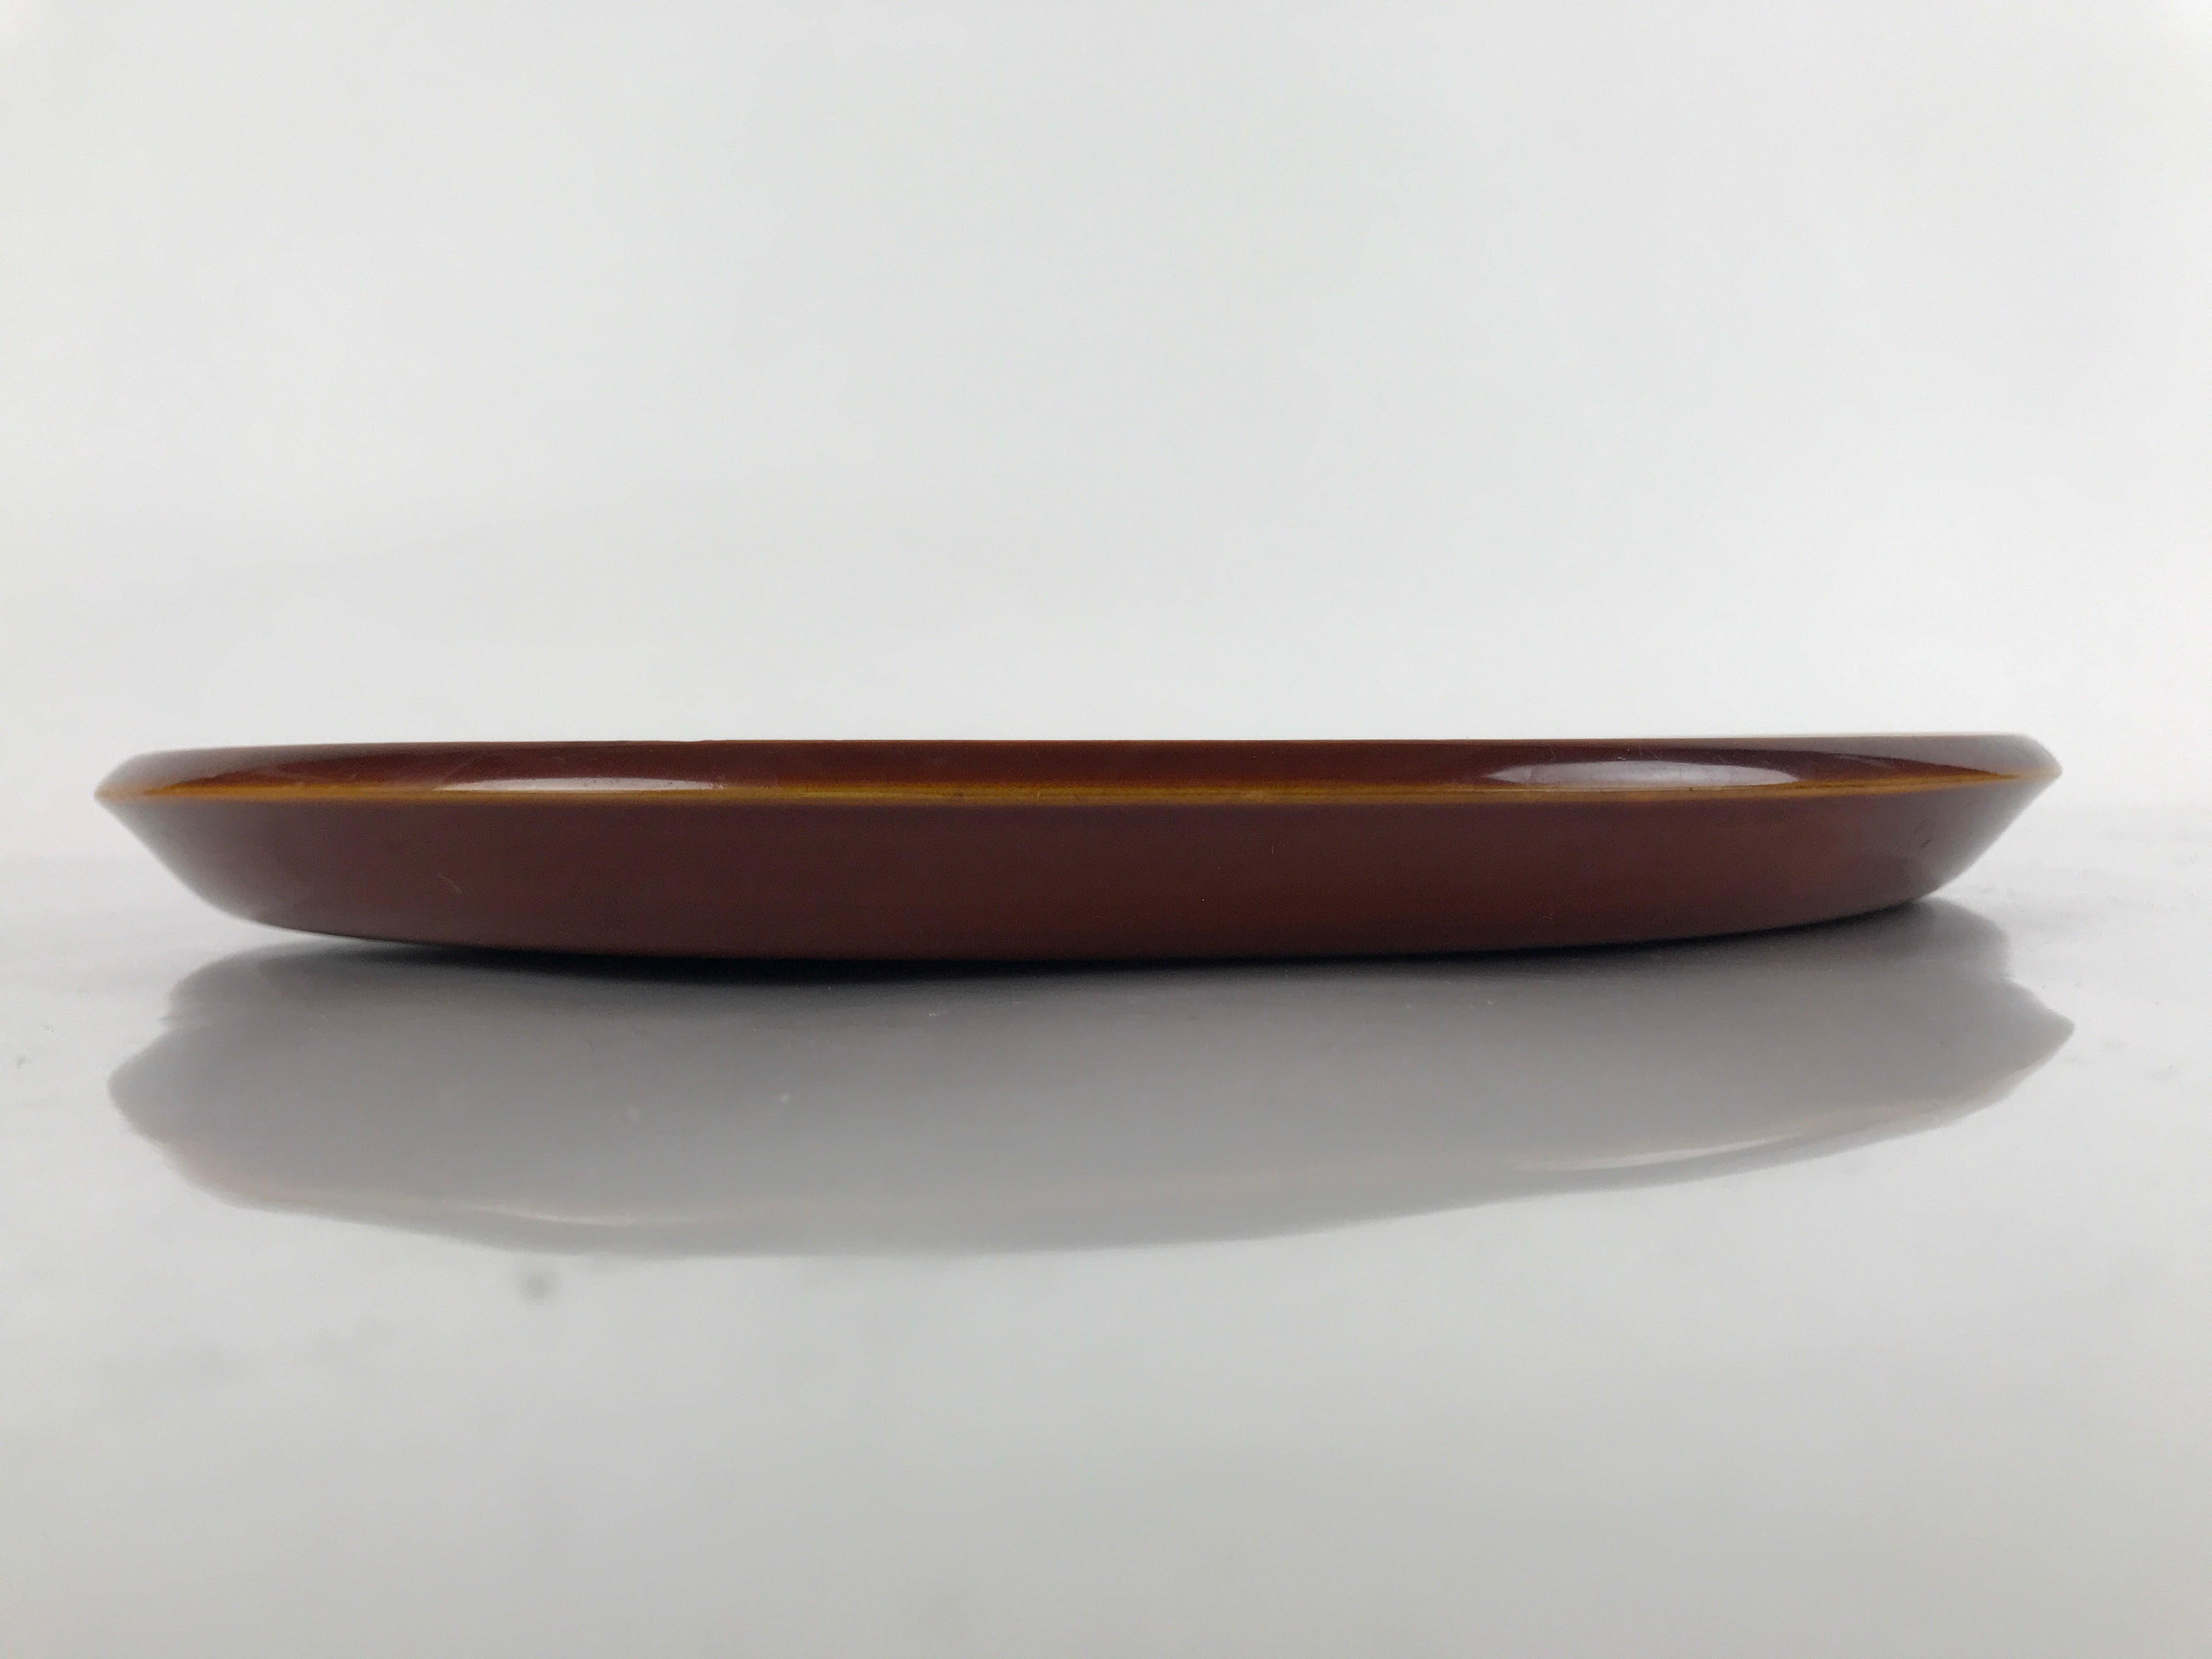 Japanese Lacquered Wooden Serving Tray Vtg Round Obon Hida Shunkei Brown L143